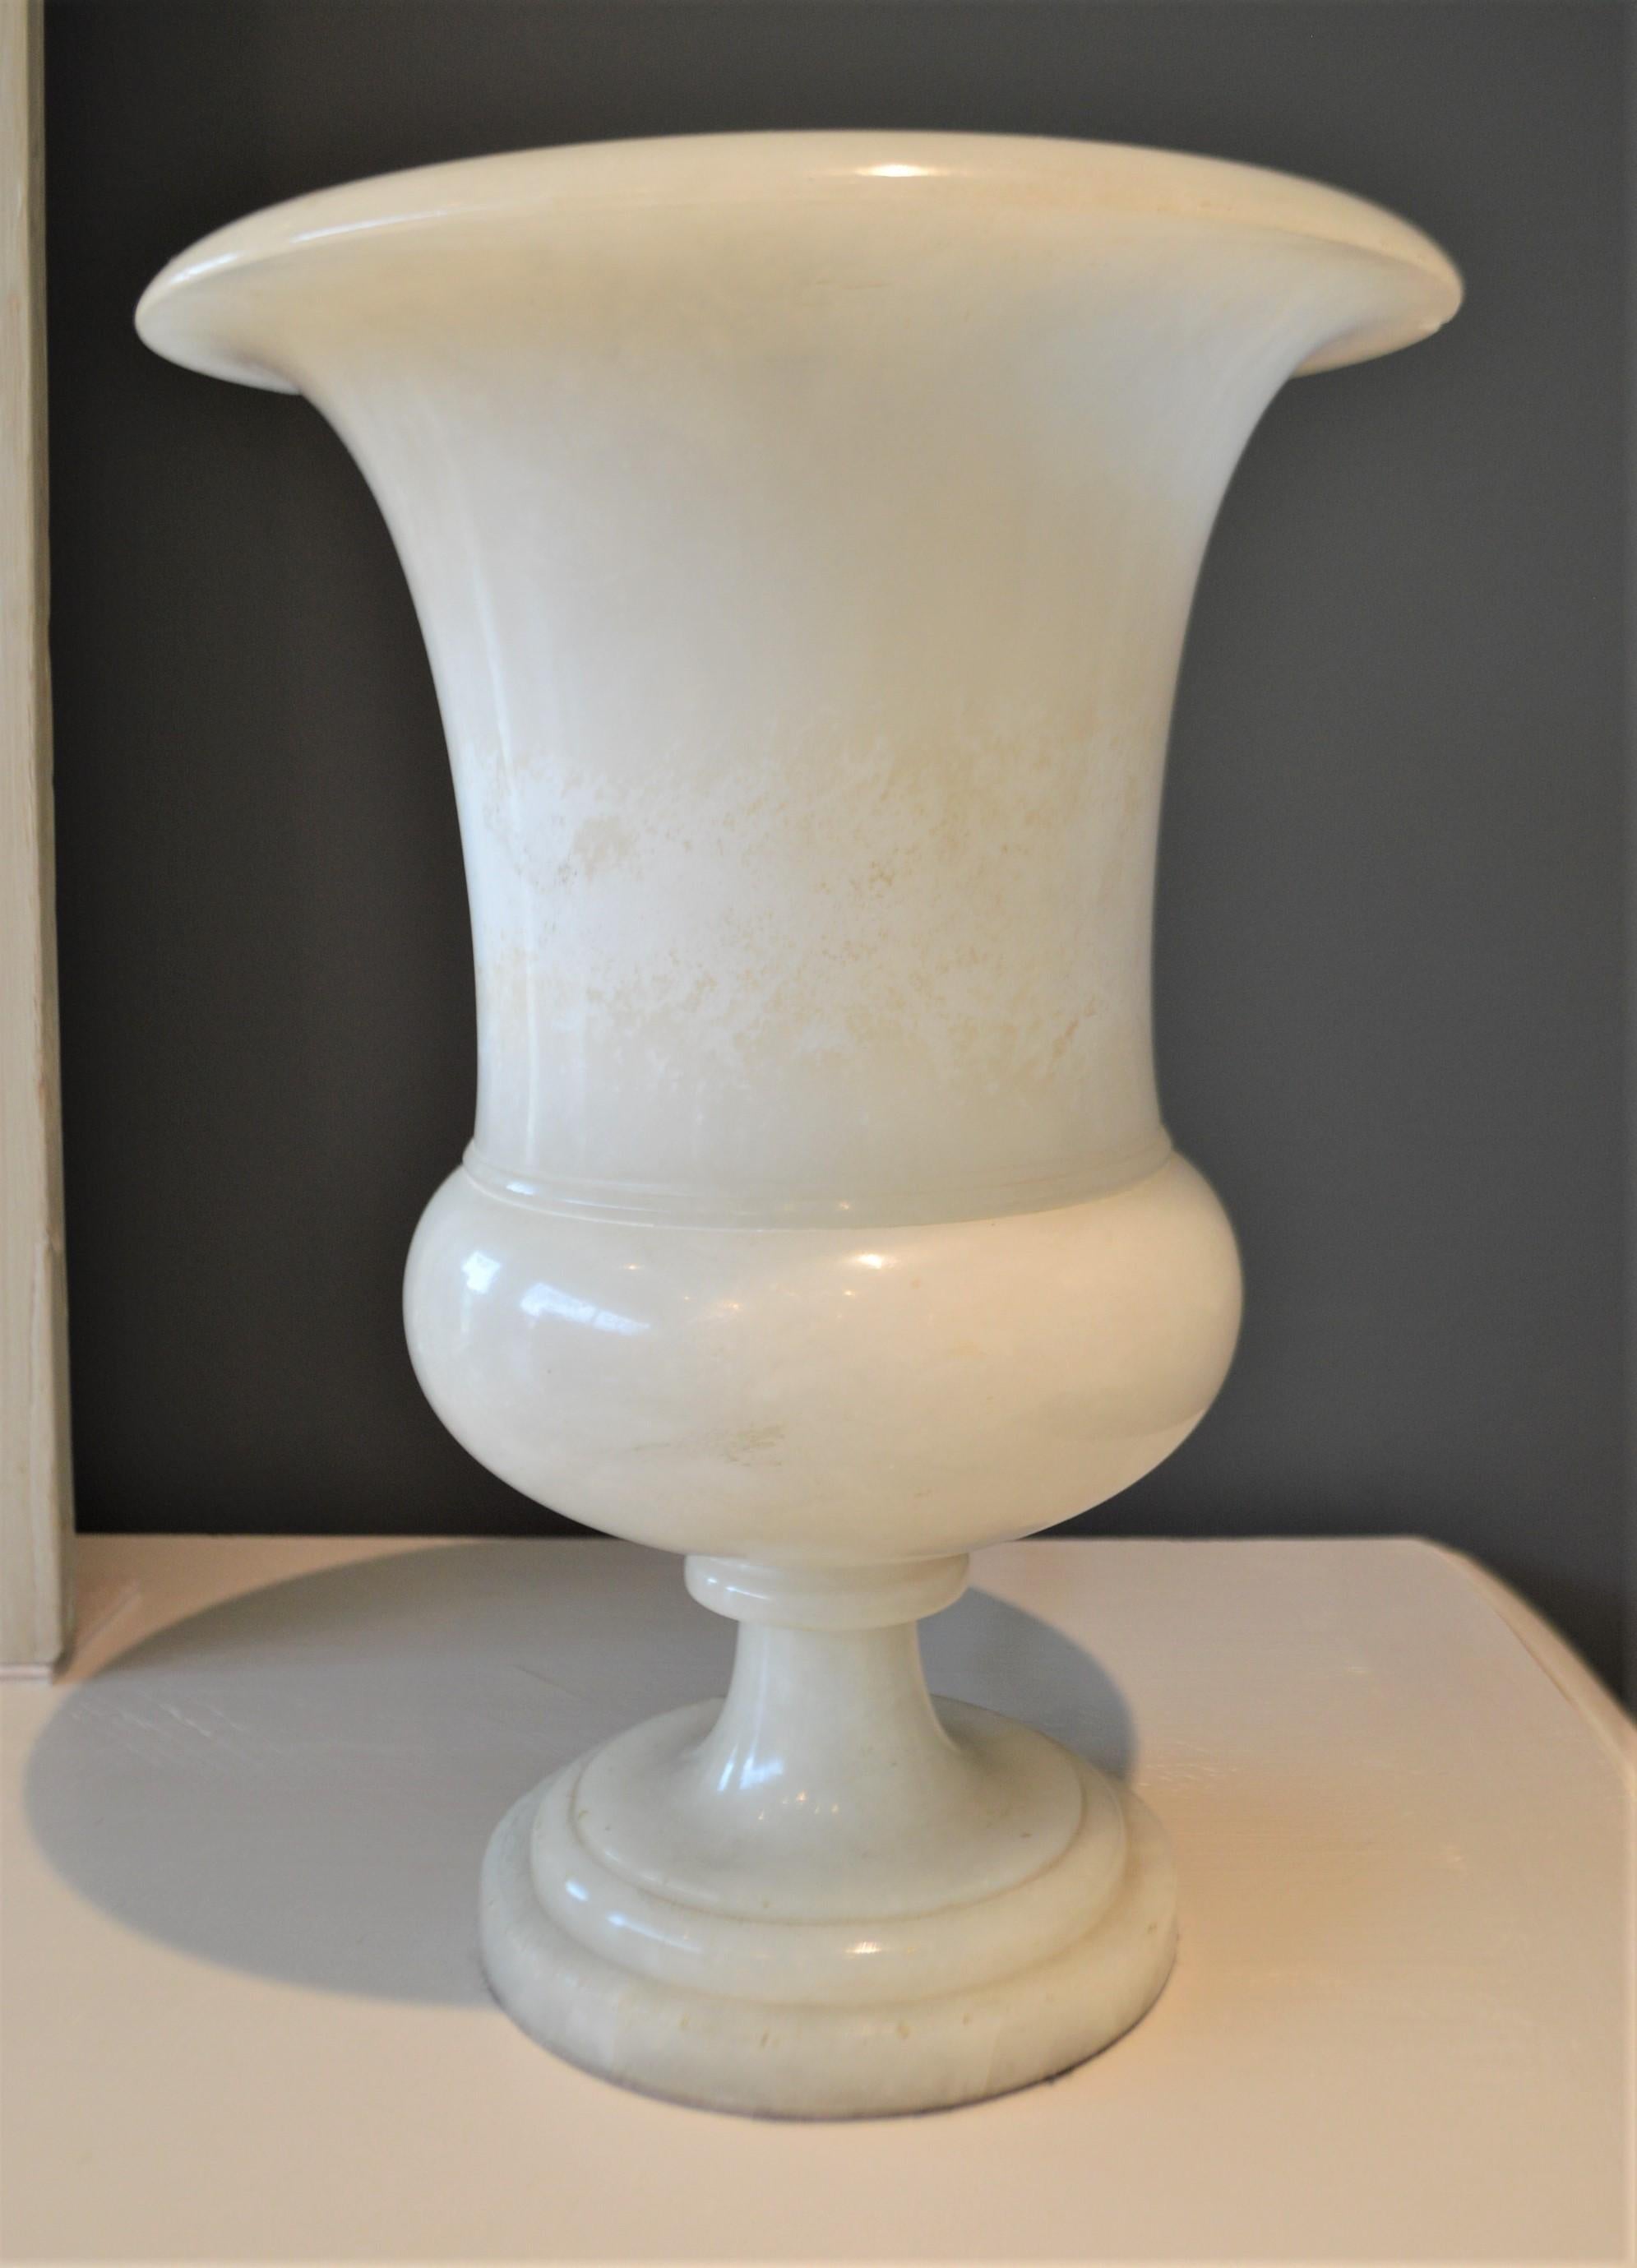 Art Deco period white marble urns that have been converted into nice
table lamps. Attractive and decorative without the light and brings much drama when lit at night. The color of the marble changes where the light hits when turned on. Each urn has